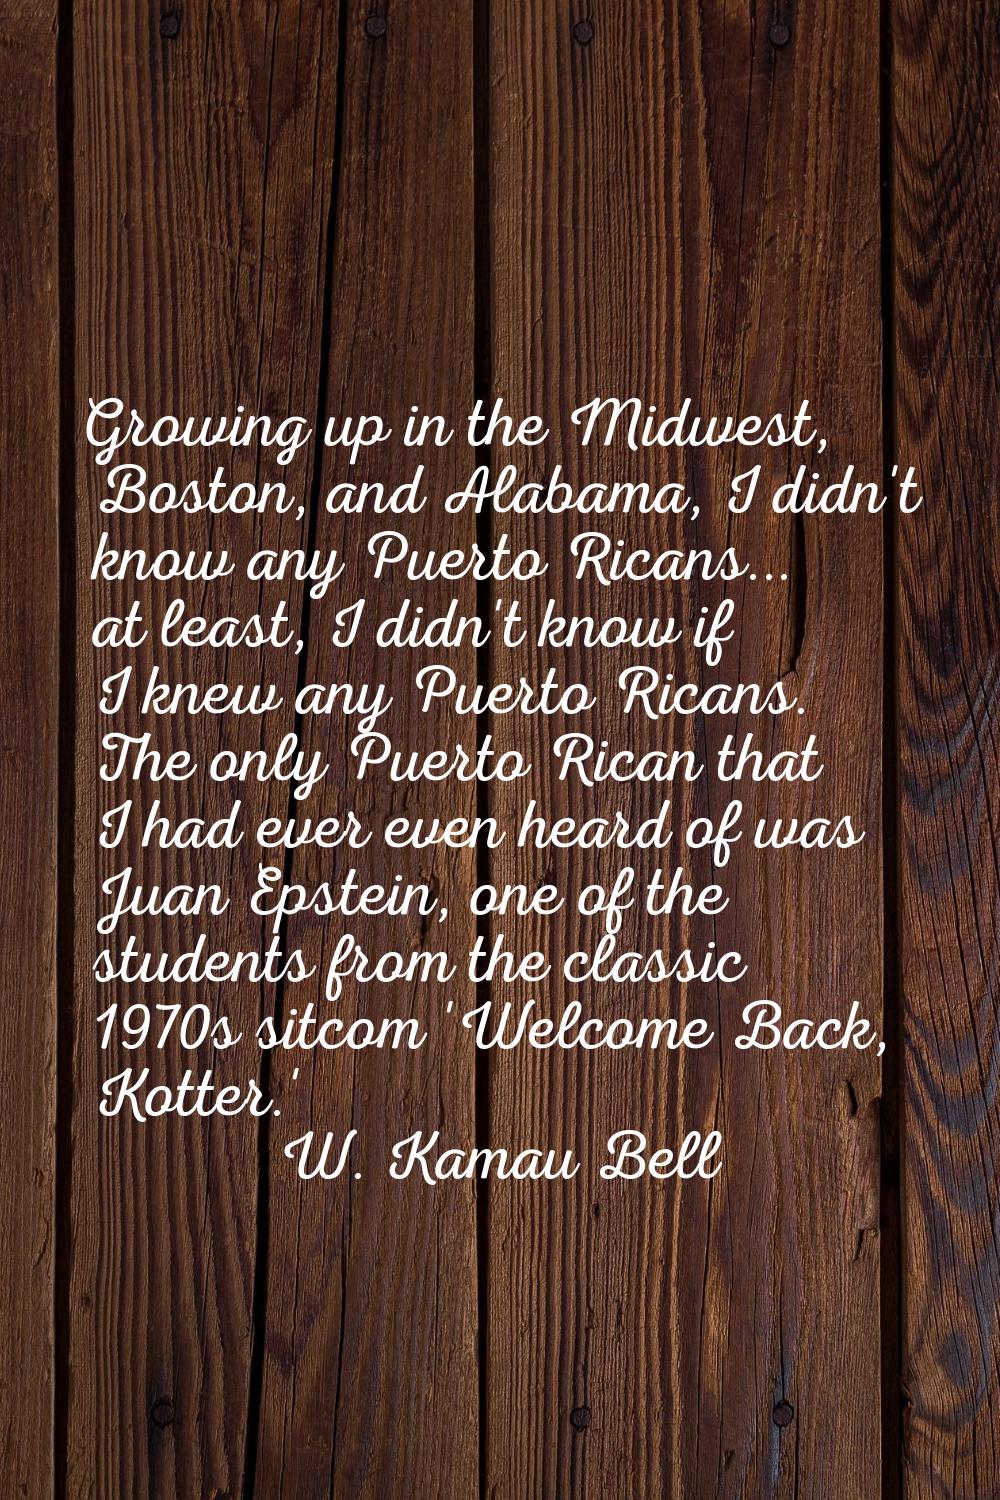 Growing up in the Midwest, Boston, and Alabama, I didn't know any Puerto Ricans... at least, I didn